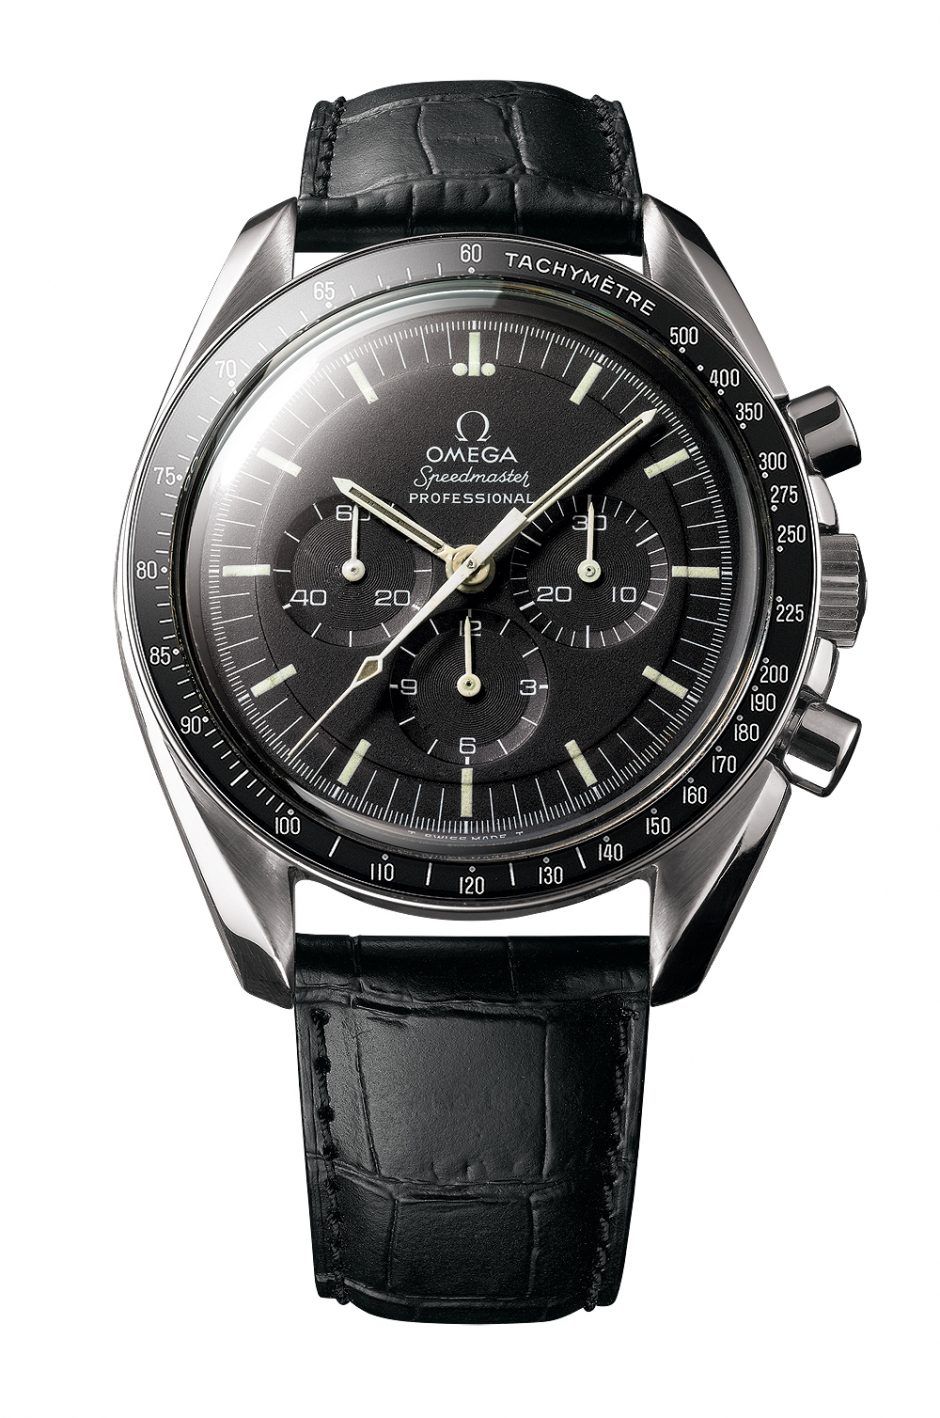 Six Decades of Omega Speedmaster, Part 1: 1957 - 1969 | WatchTime - USA ...